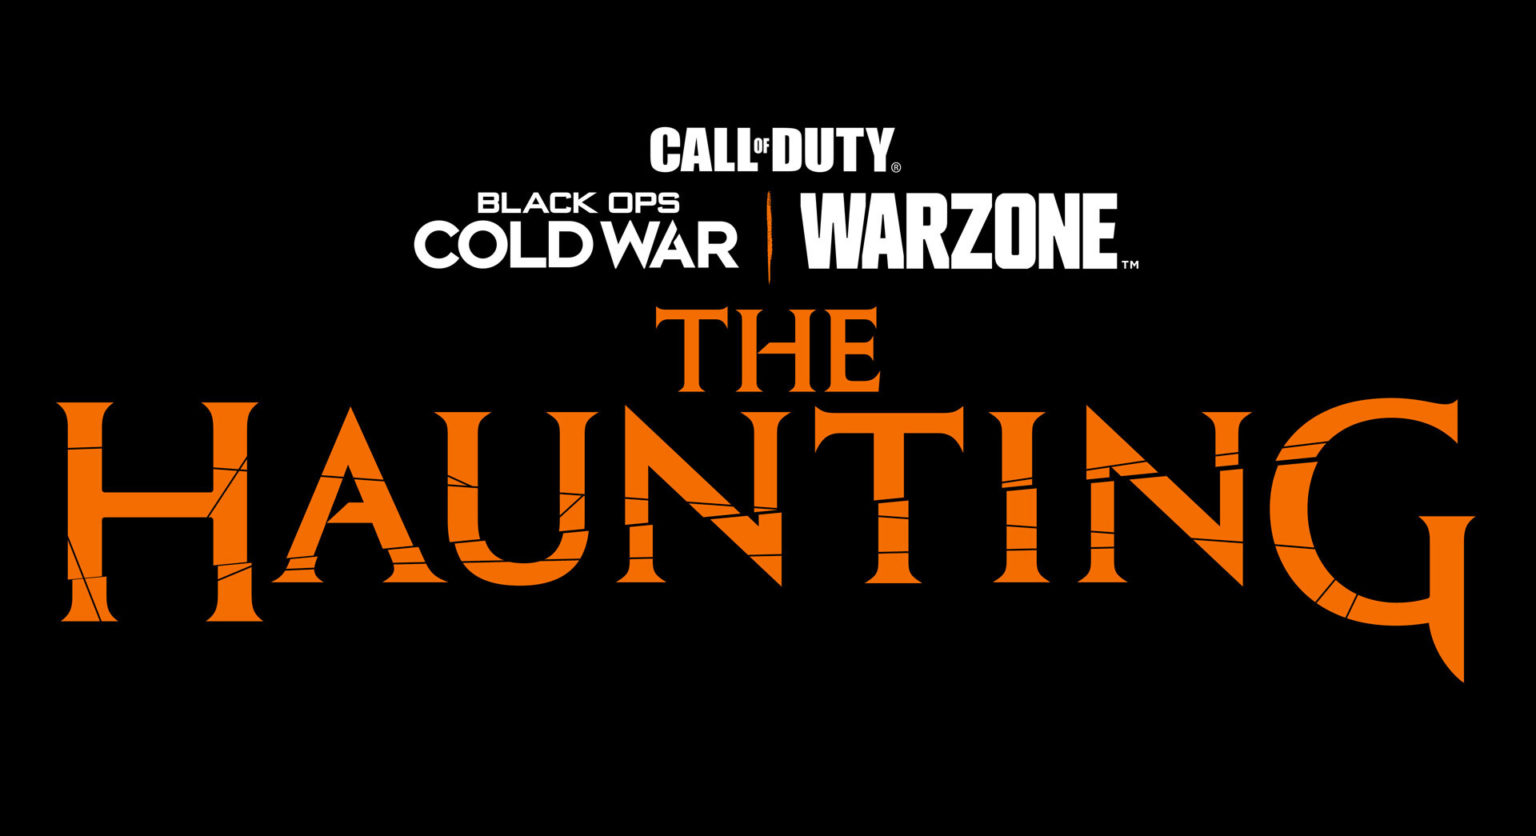 Call of Duty tiiserivideo "The Haunting" peaosades on Faze Swagg, Screami Ghostface!